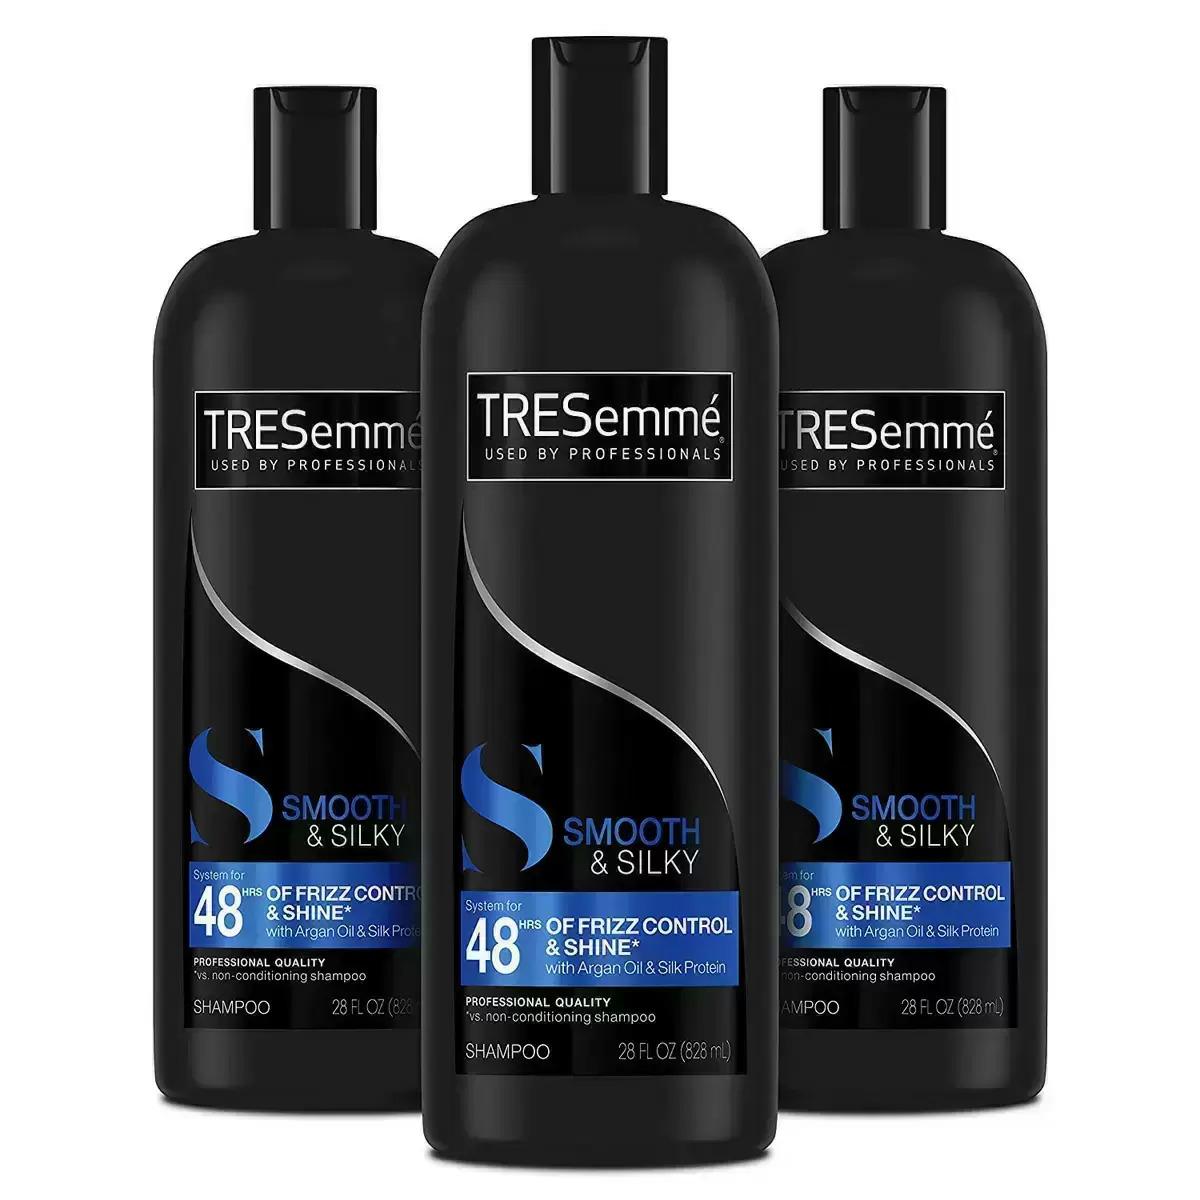 3 TRESemme Smooth and Silky Shampoo for $6.23 Shipped